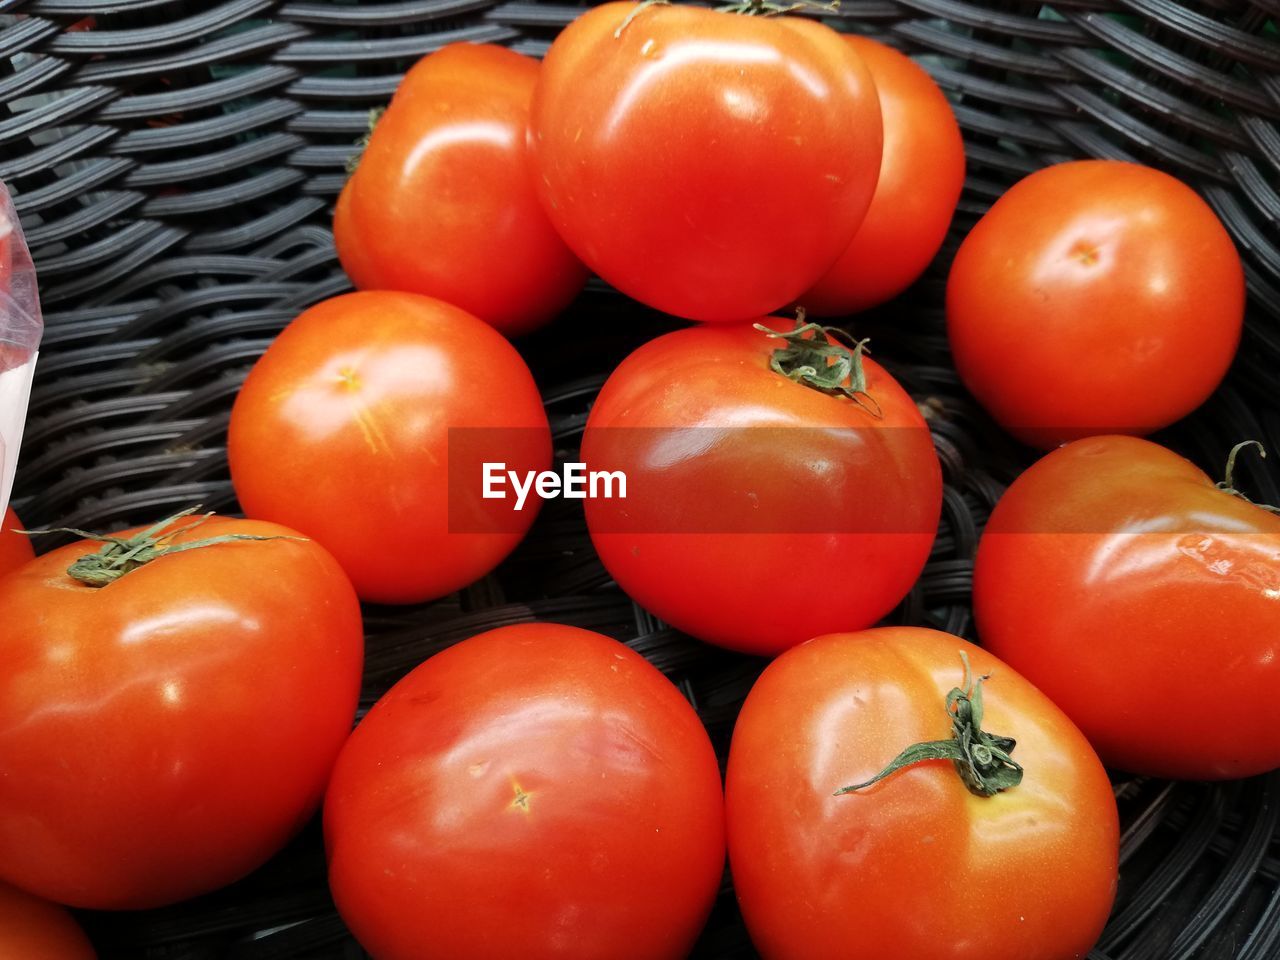 HIGH ANGLE VIEW OF TOMATOES ON MARKET